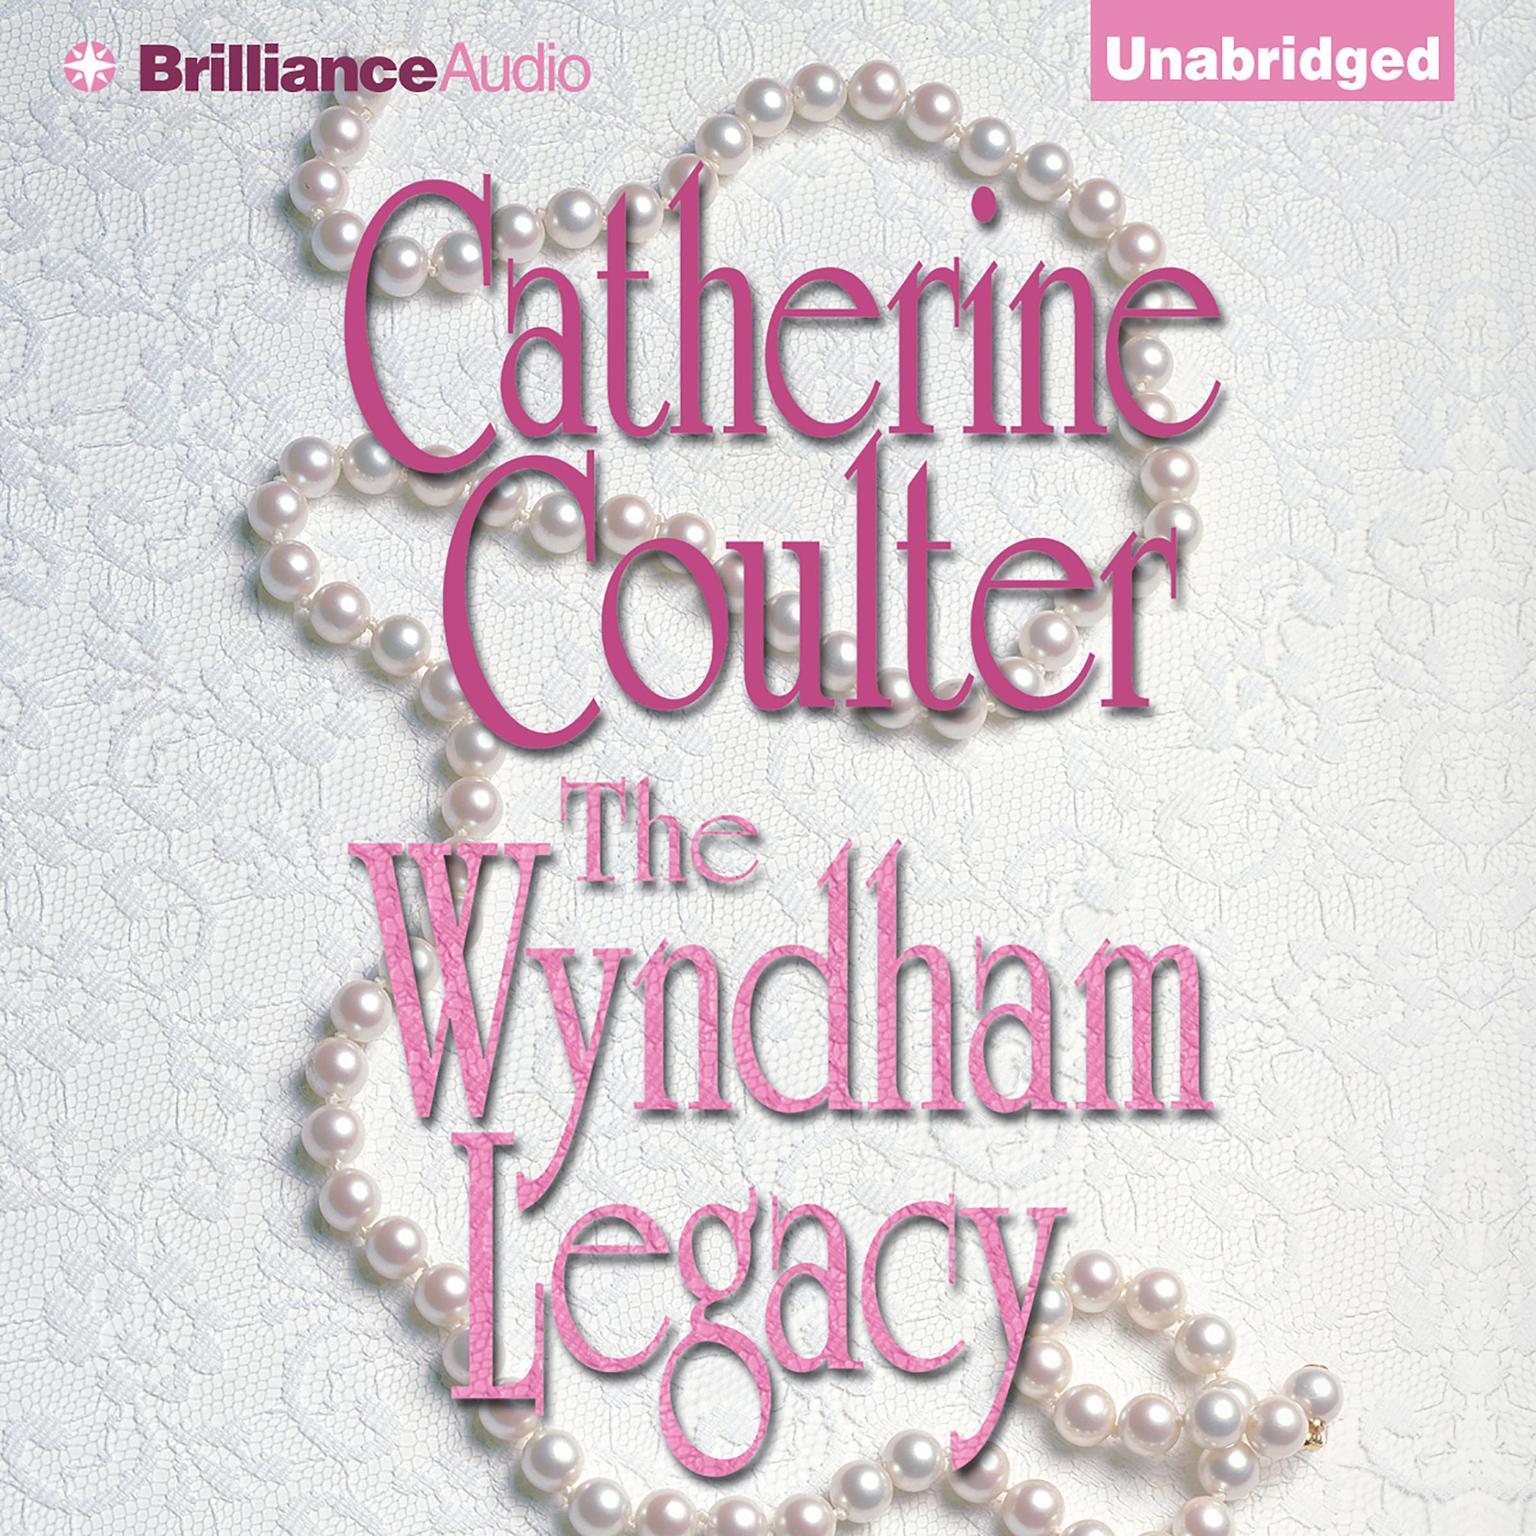 The Wyndham Legacy Audiobook, by Catherine Coulter